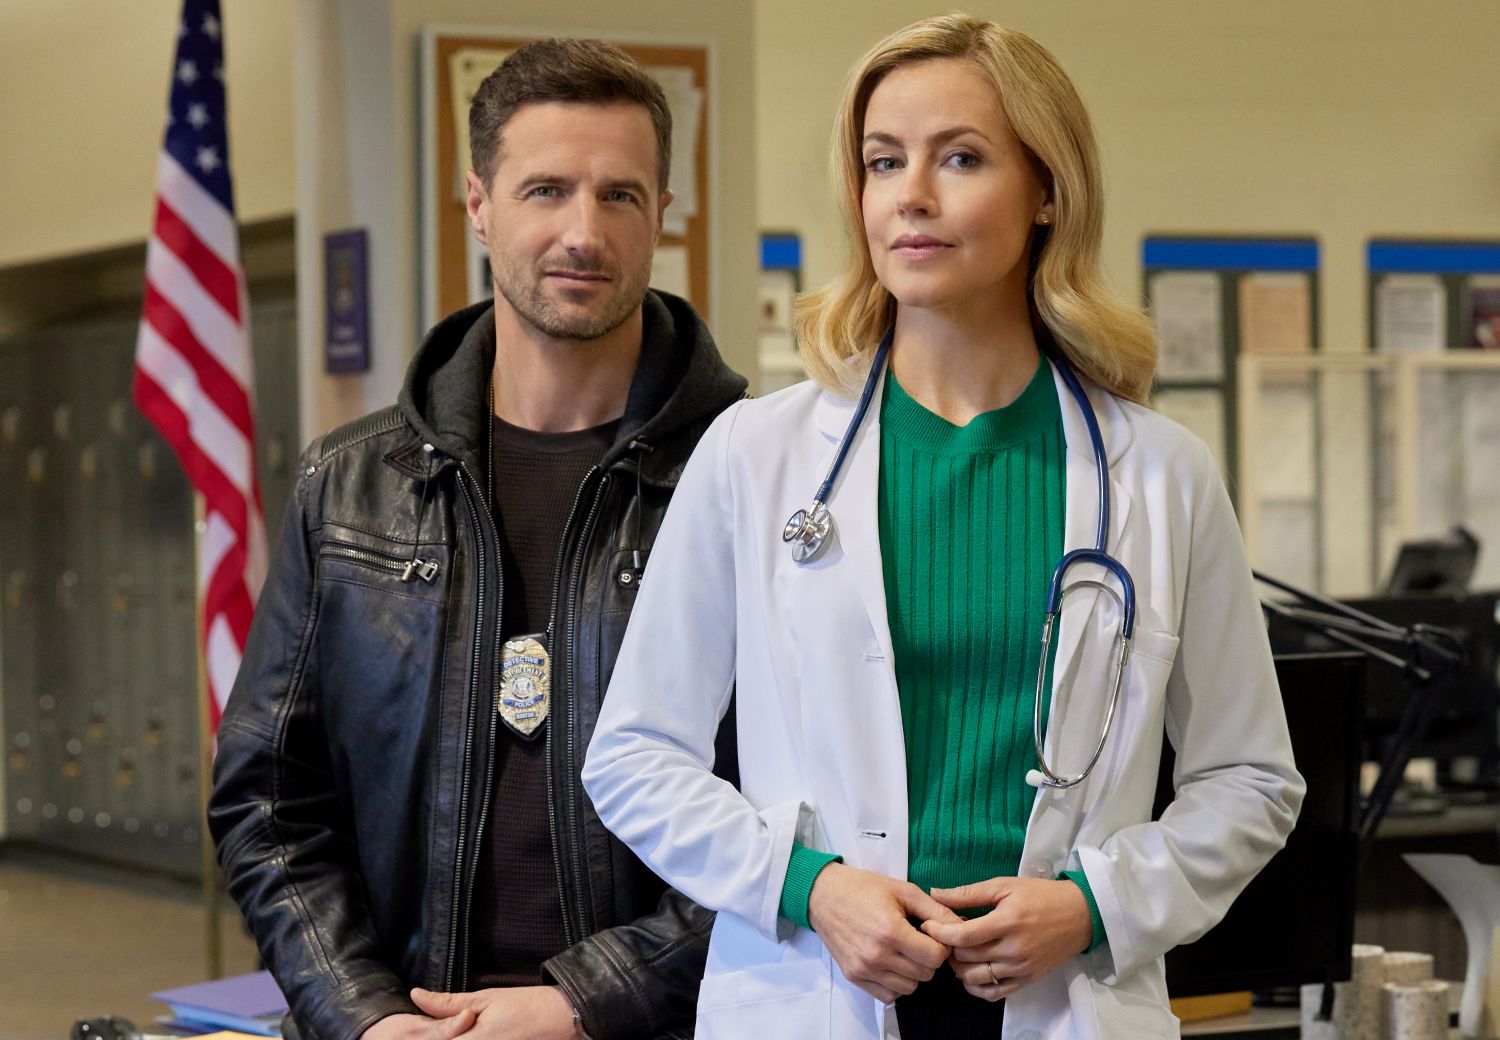 Family Practice Mysteries: Coming Home on Hallmark Mystery